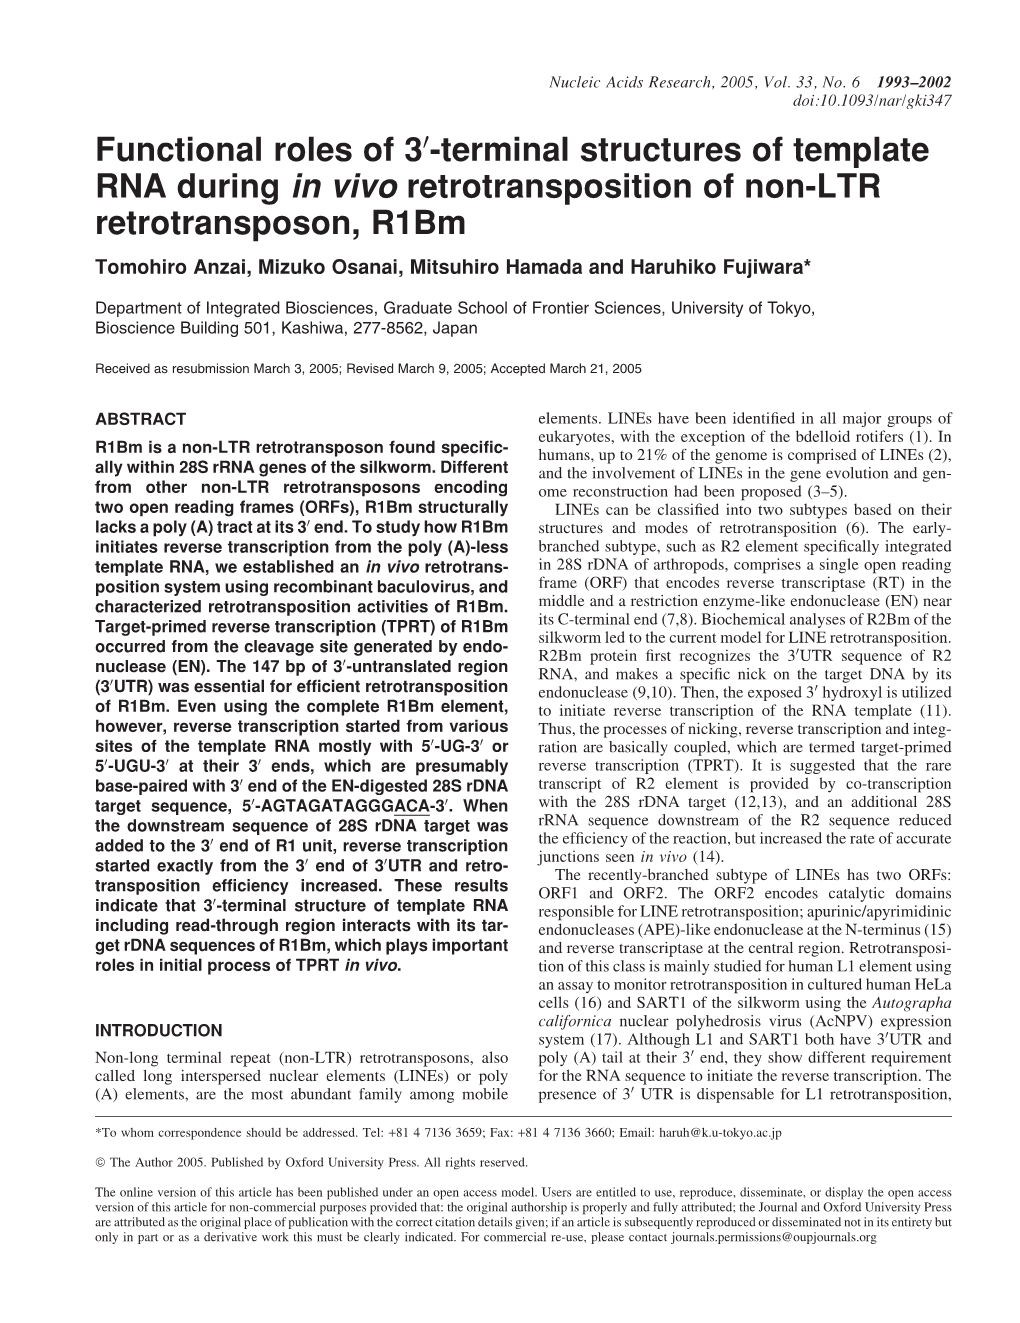 Functional Roles of 3 0-Terminal Structures of Template RNA During